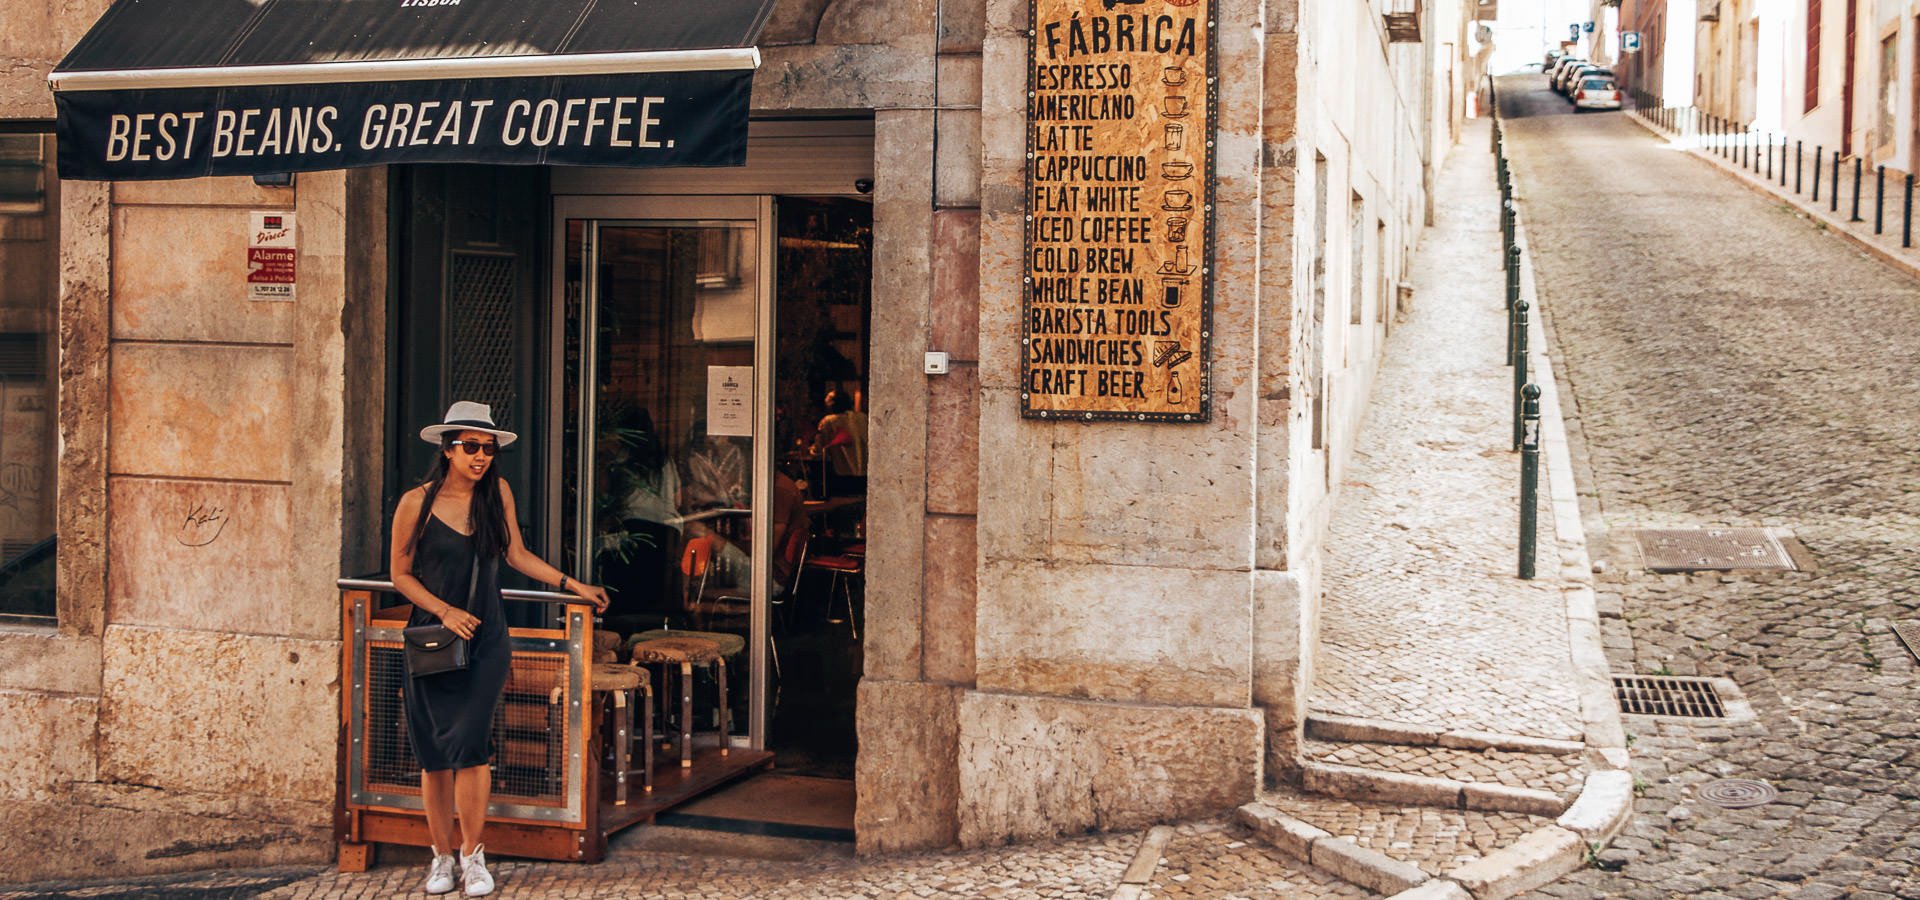 The 5 Best Cafes In Lisbon Portugal | The Travel Quandary